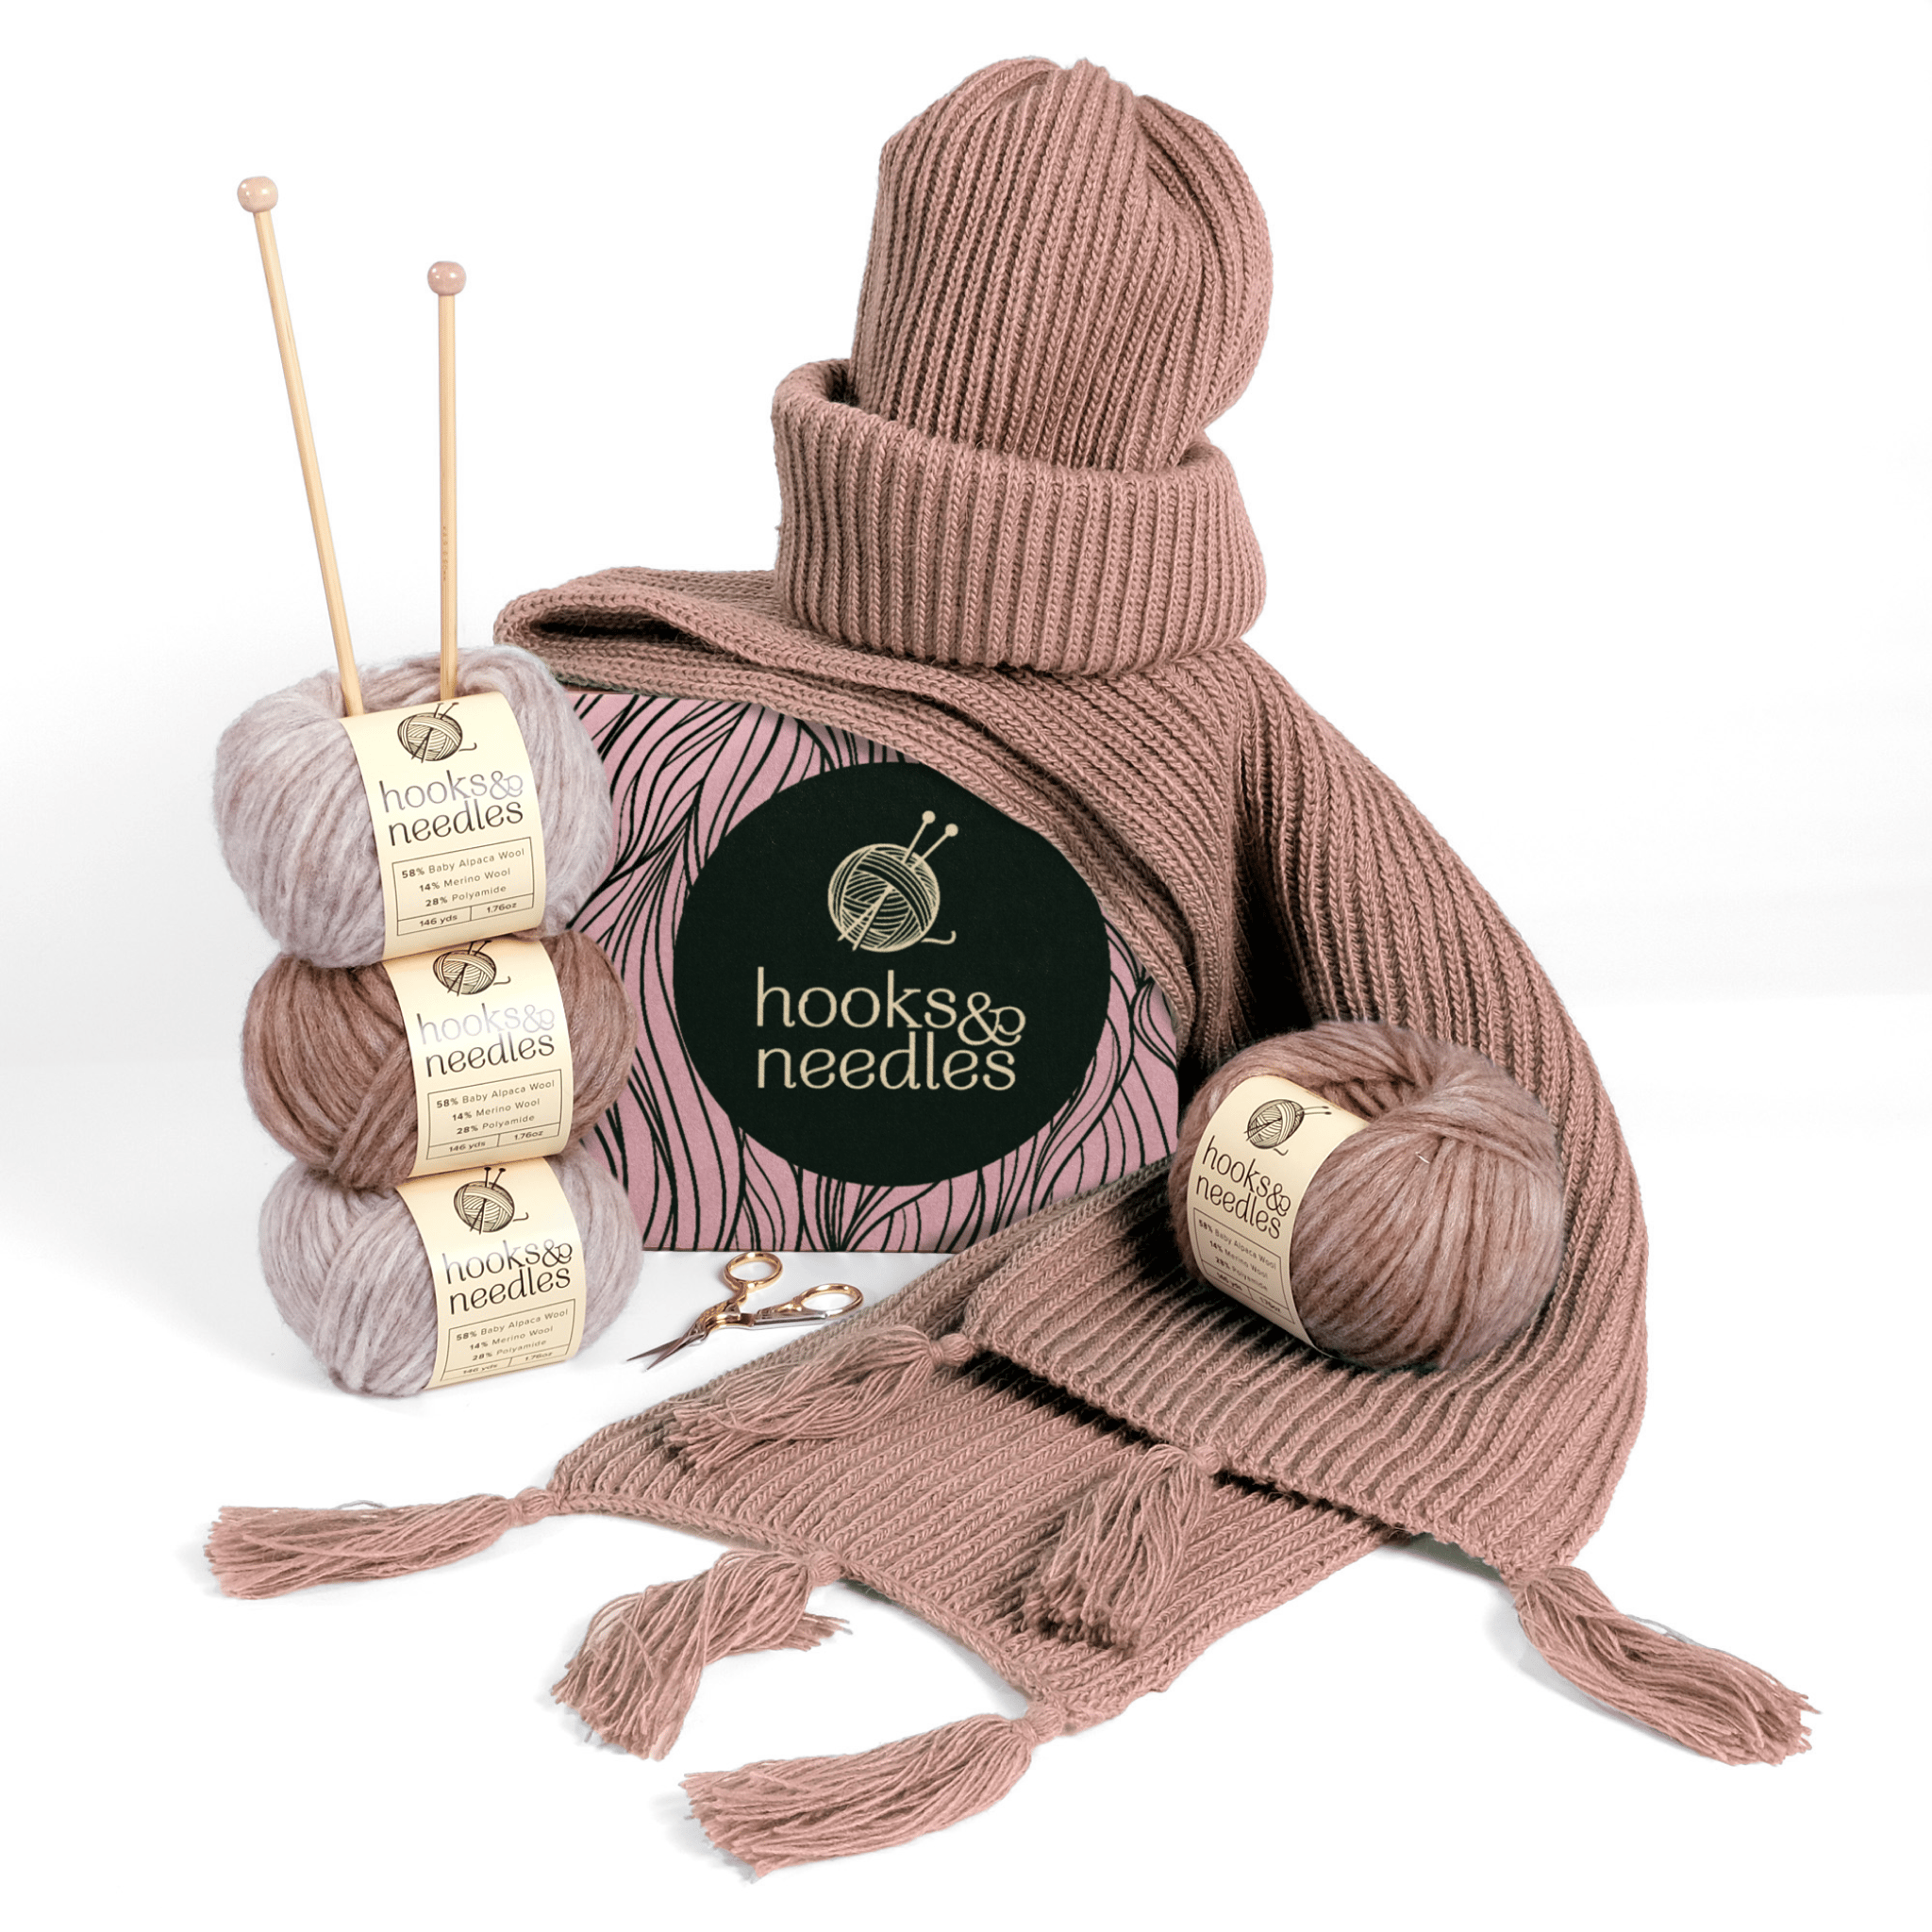 A collection of Hooks & Needles Subscription Box #30 including yarn balls, knitting needles, a scarf, and a sweater, all in coordinating dusty pink tones, arranged on a white background.